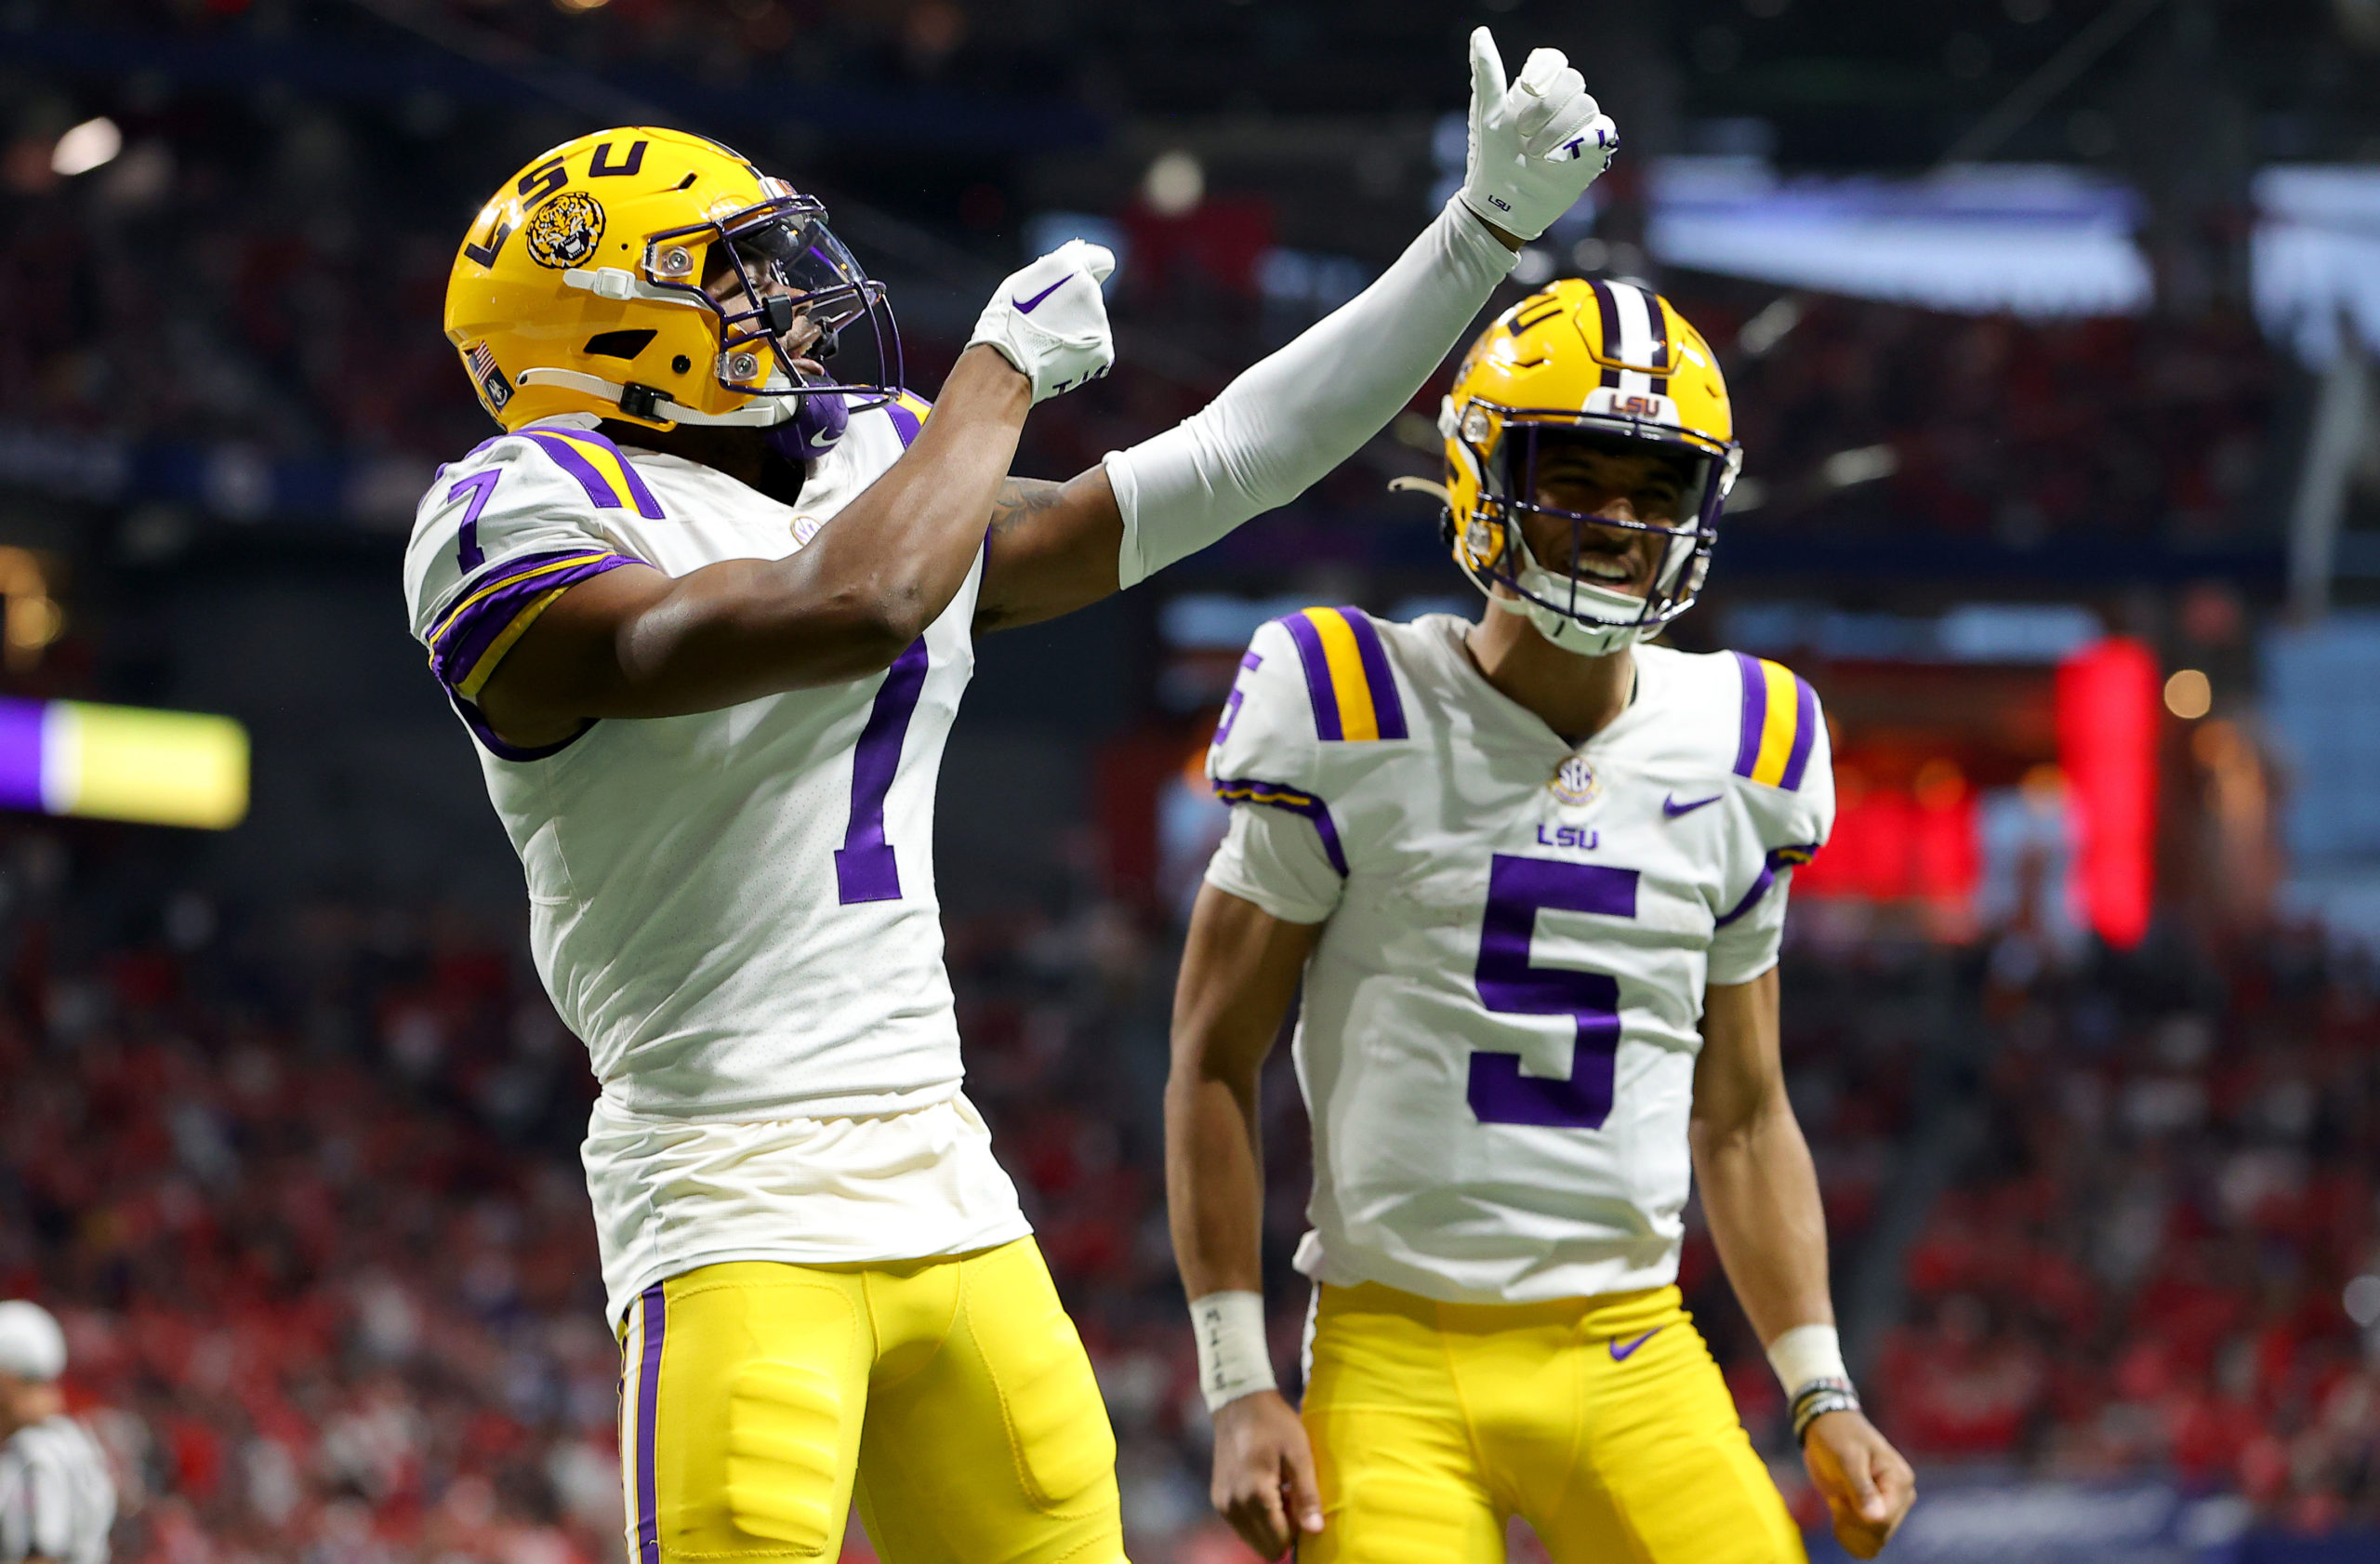 ATLANTA, GEORGIA - DECEMBER 03: Kayshon Boutte #7 of the LSU Tigers celebrates with Jayden Daniels #5 after scoring a 53 yard touchdown against the Georgia Bulldogs during the first quarter in the SEC Championship game at Mercedes-Benz Stadium on December 03, 2022 in Atlanta, Georgia. Kevin C. Cox/Getty Images